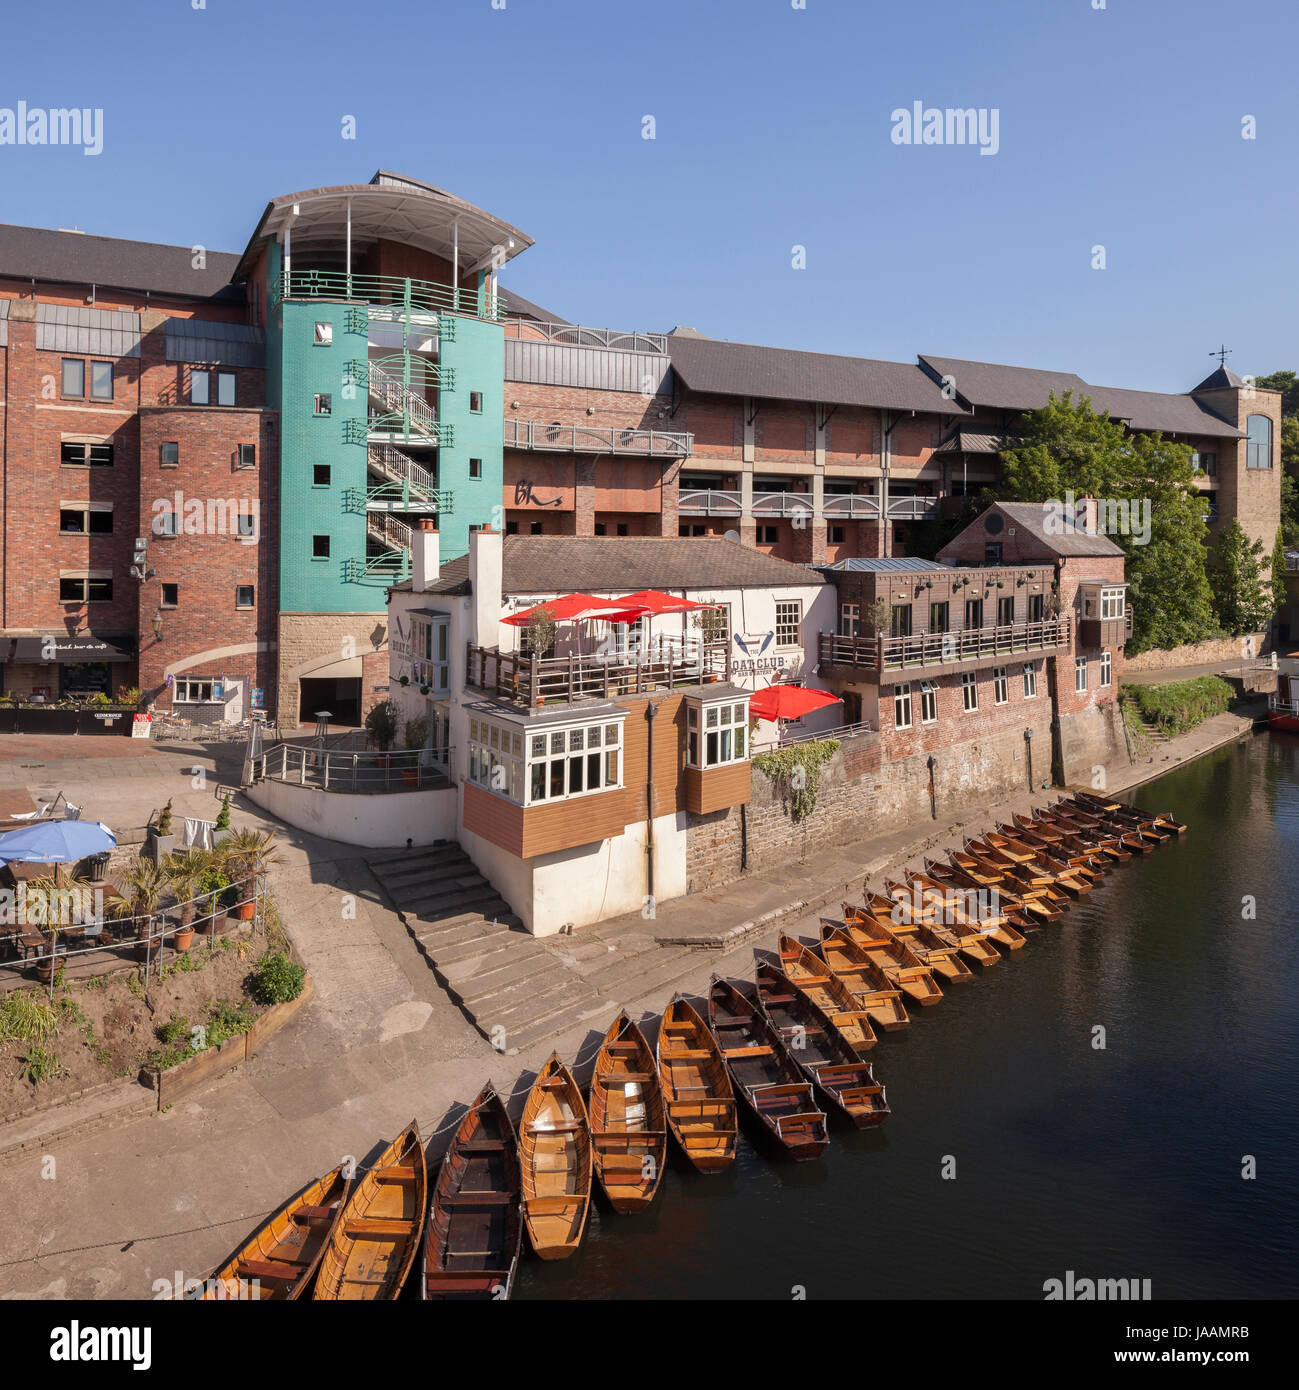 26 May 2017: Durham City, County Durham, England, UK - Boats for hire on the River Wear in Durham, in front of the Boat Club restaurant and Prince Bis Stock Photo